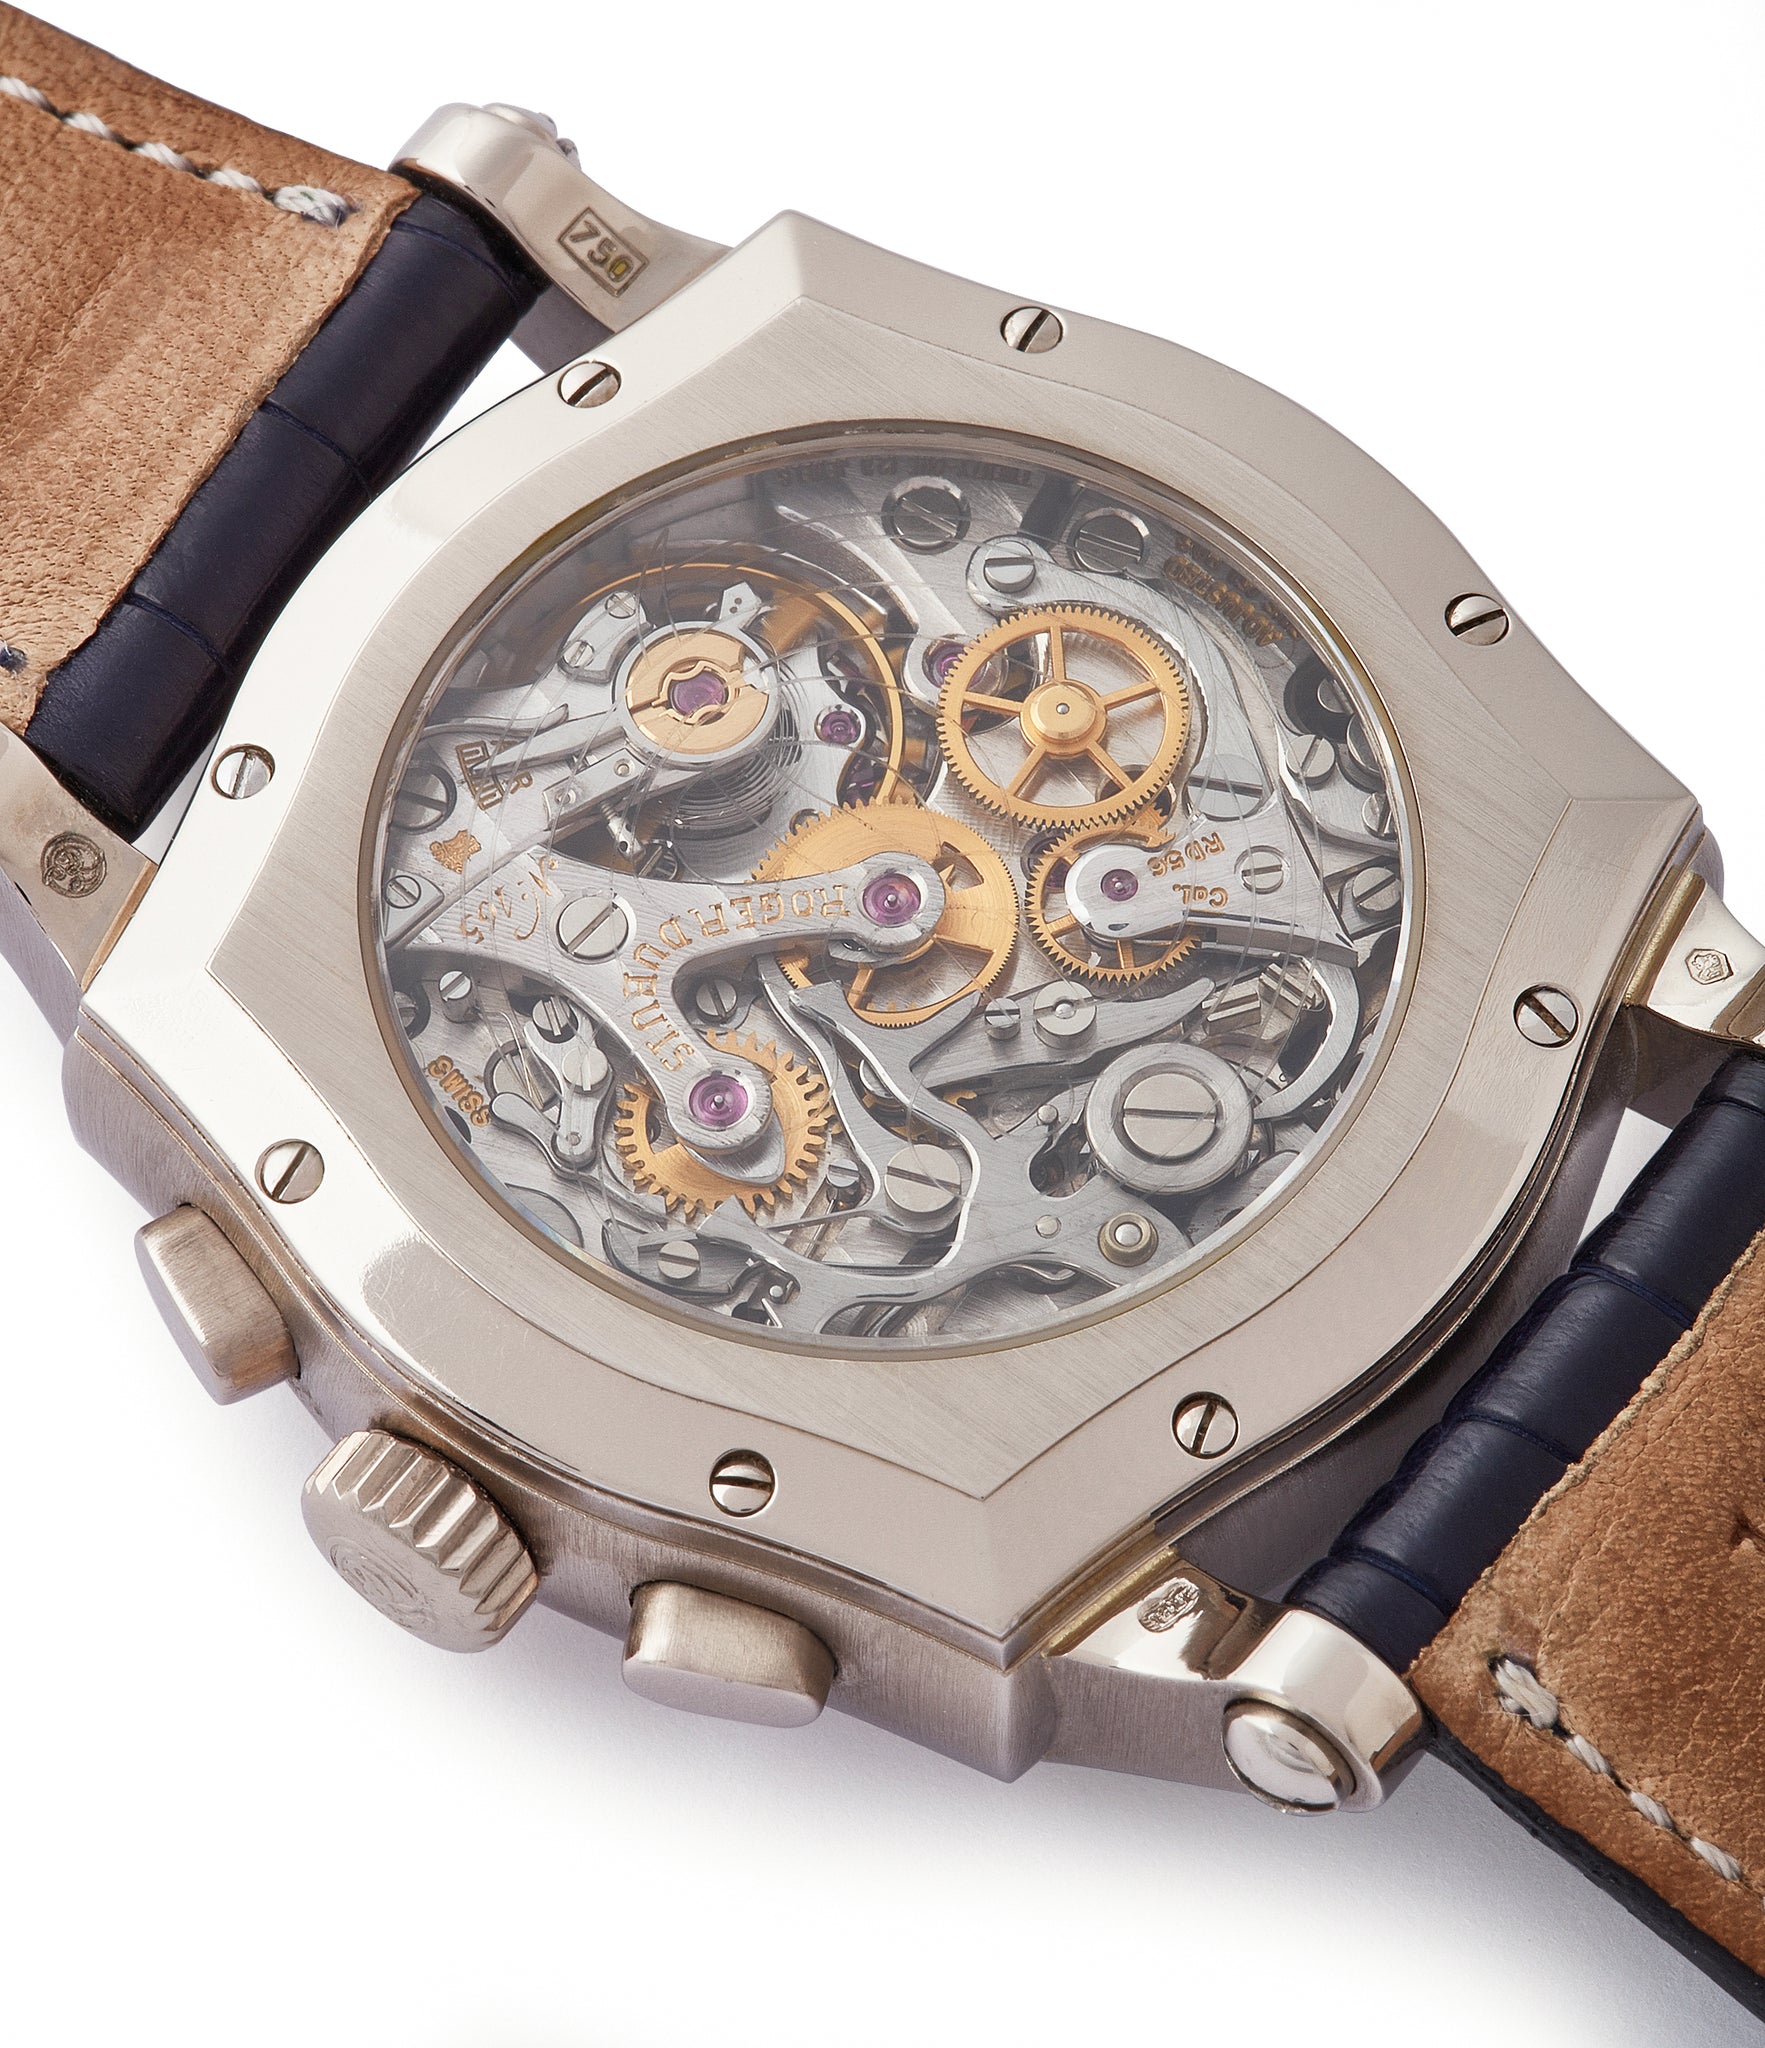 RD 56 Sympathie Chronograph Roger Dubuis S37 Limited Edition white gold dress watch from independent watchmaker for sale online at A Collected Man London UK specialist of rare watches